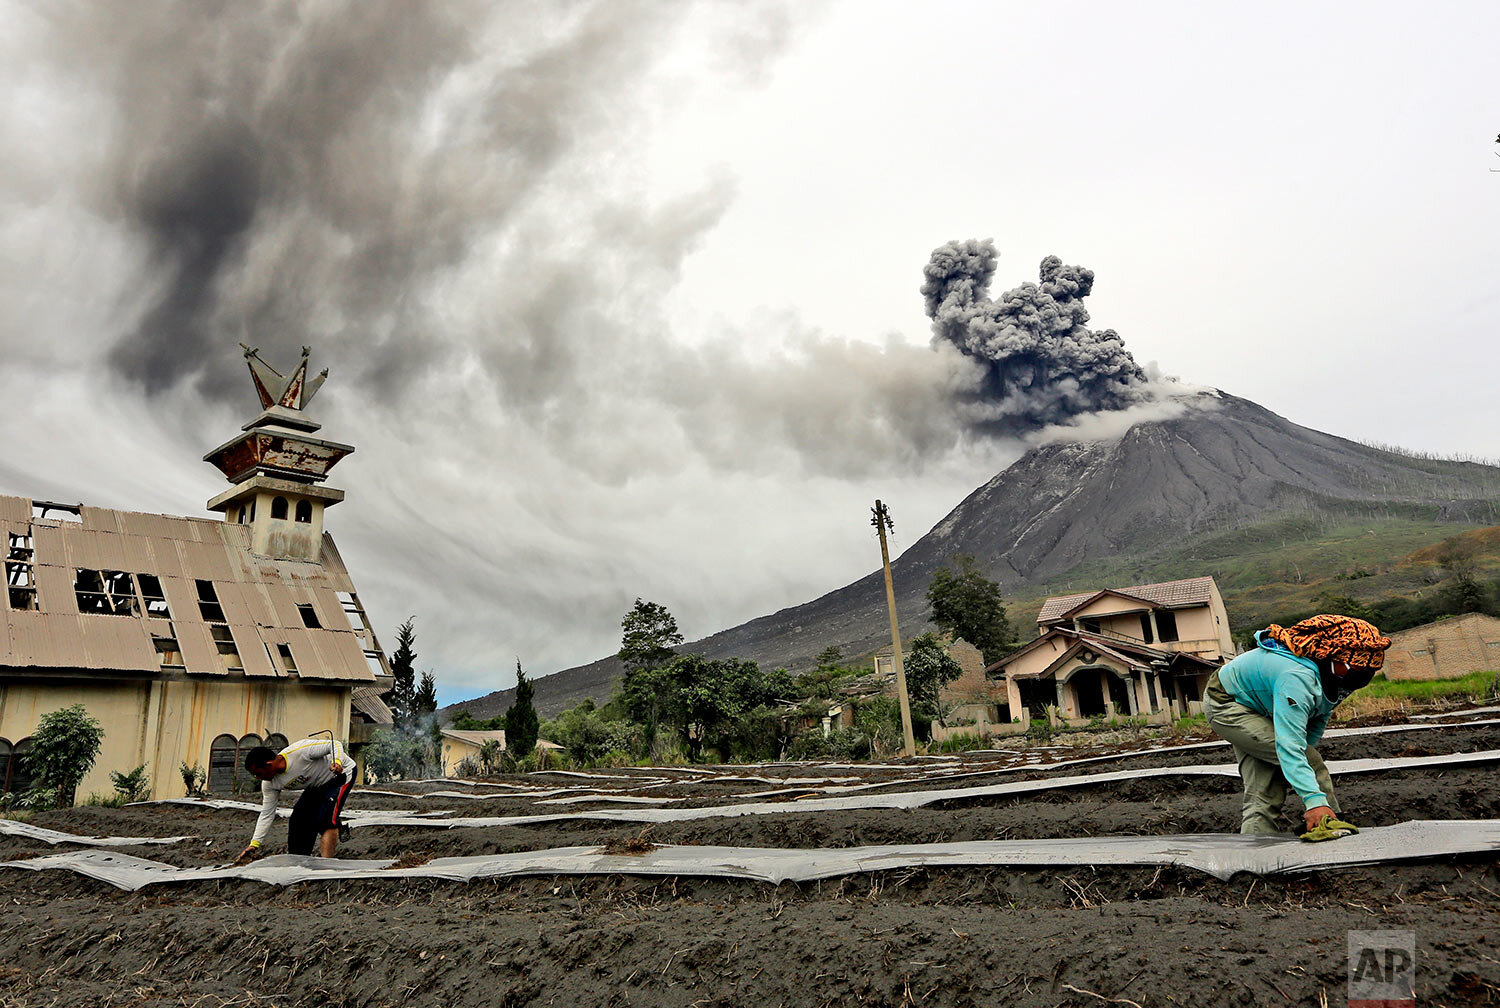  Villagers work at their farm as Mount Sinabung spews volcanic materials during an eruption, in Karo, North Sumatra, Indonesia Friday, Aug. 14, 2020.  (AP Photo) 